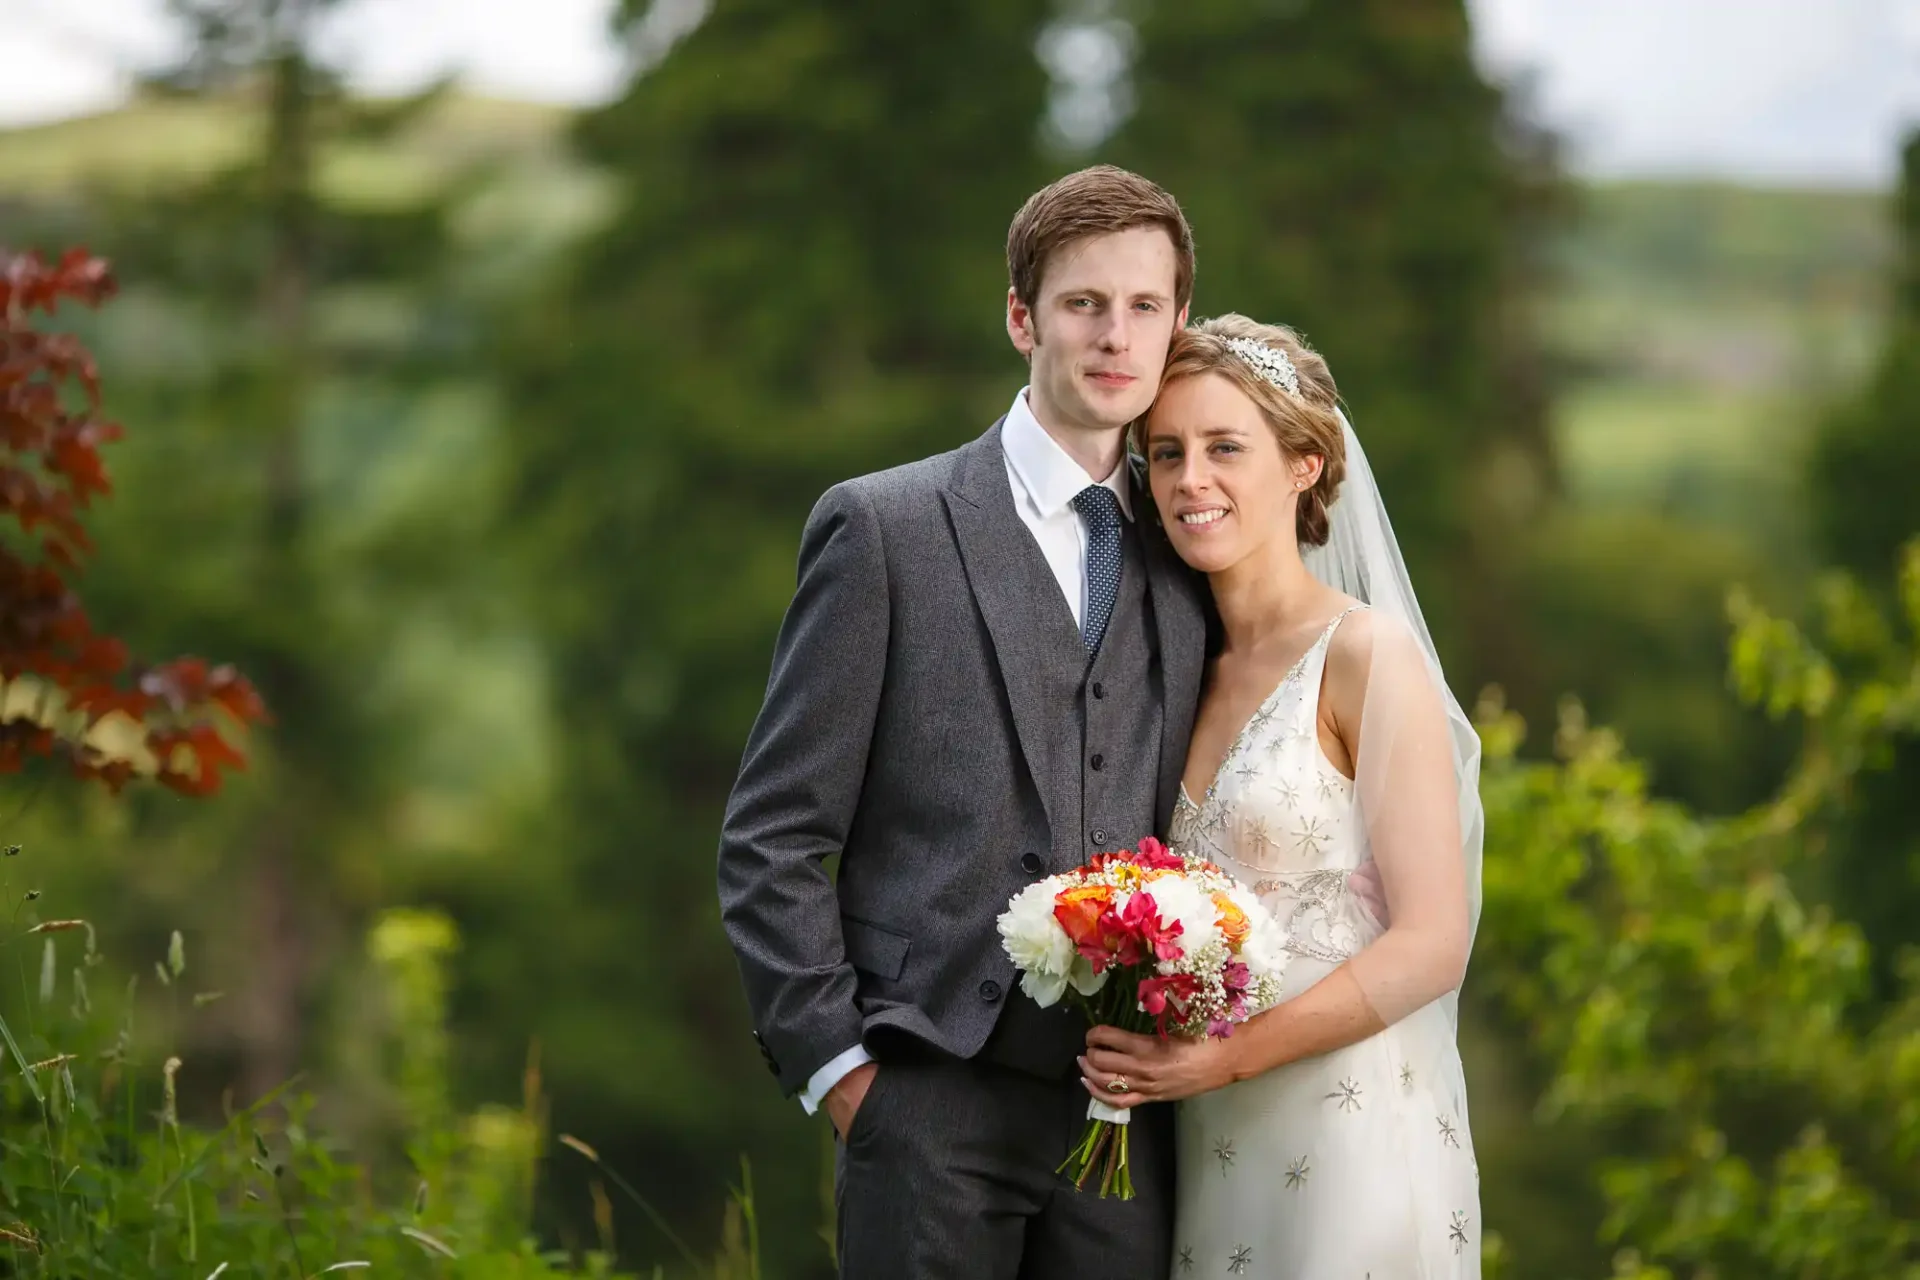 A bride and groom posing outdoors with a bouquet, set against a lush green background with trees.